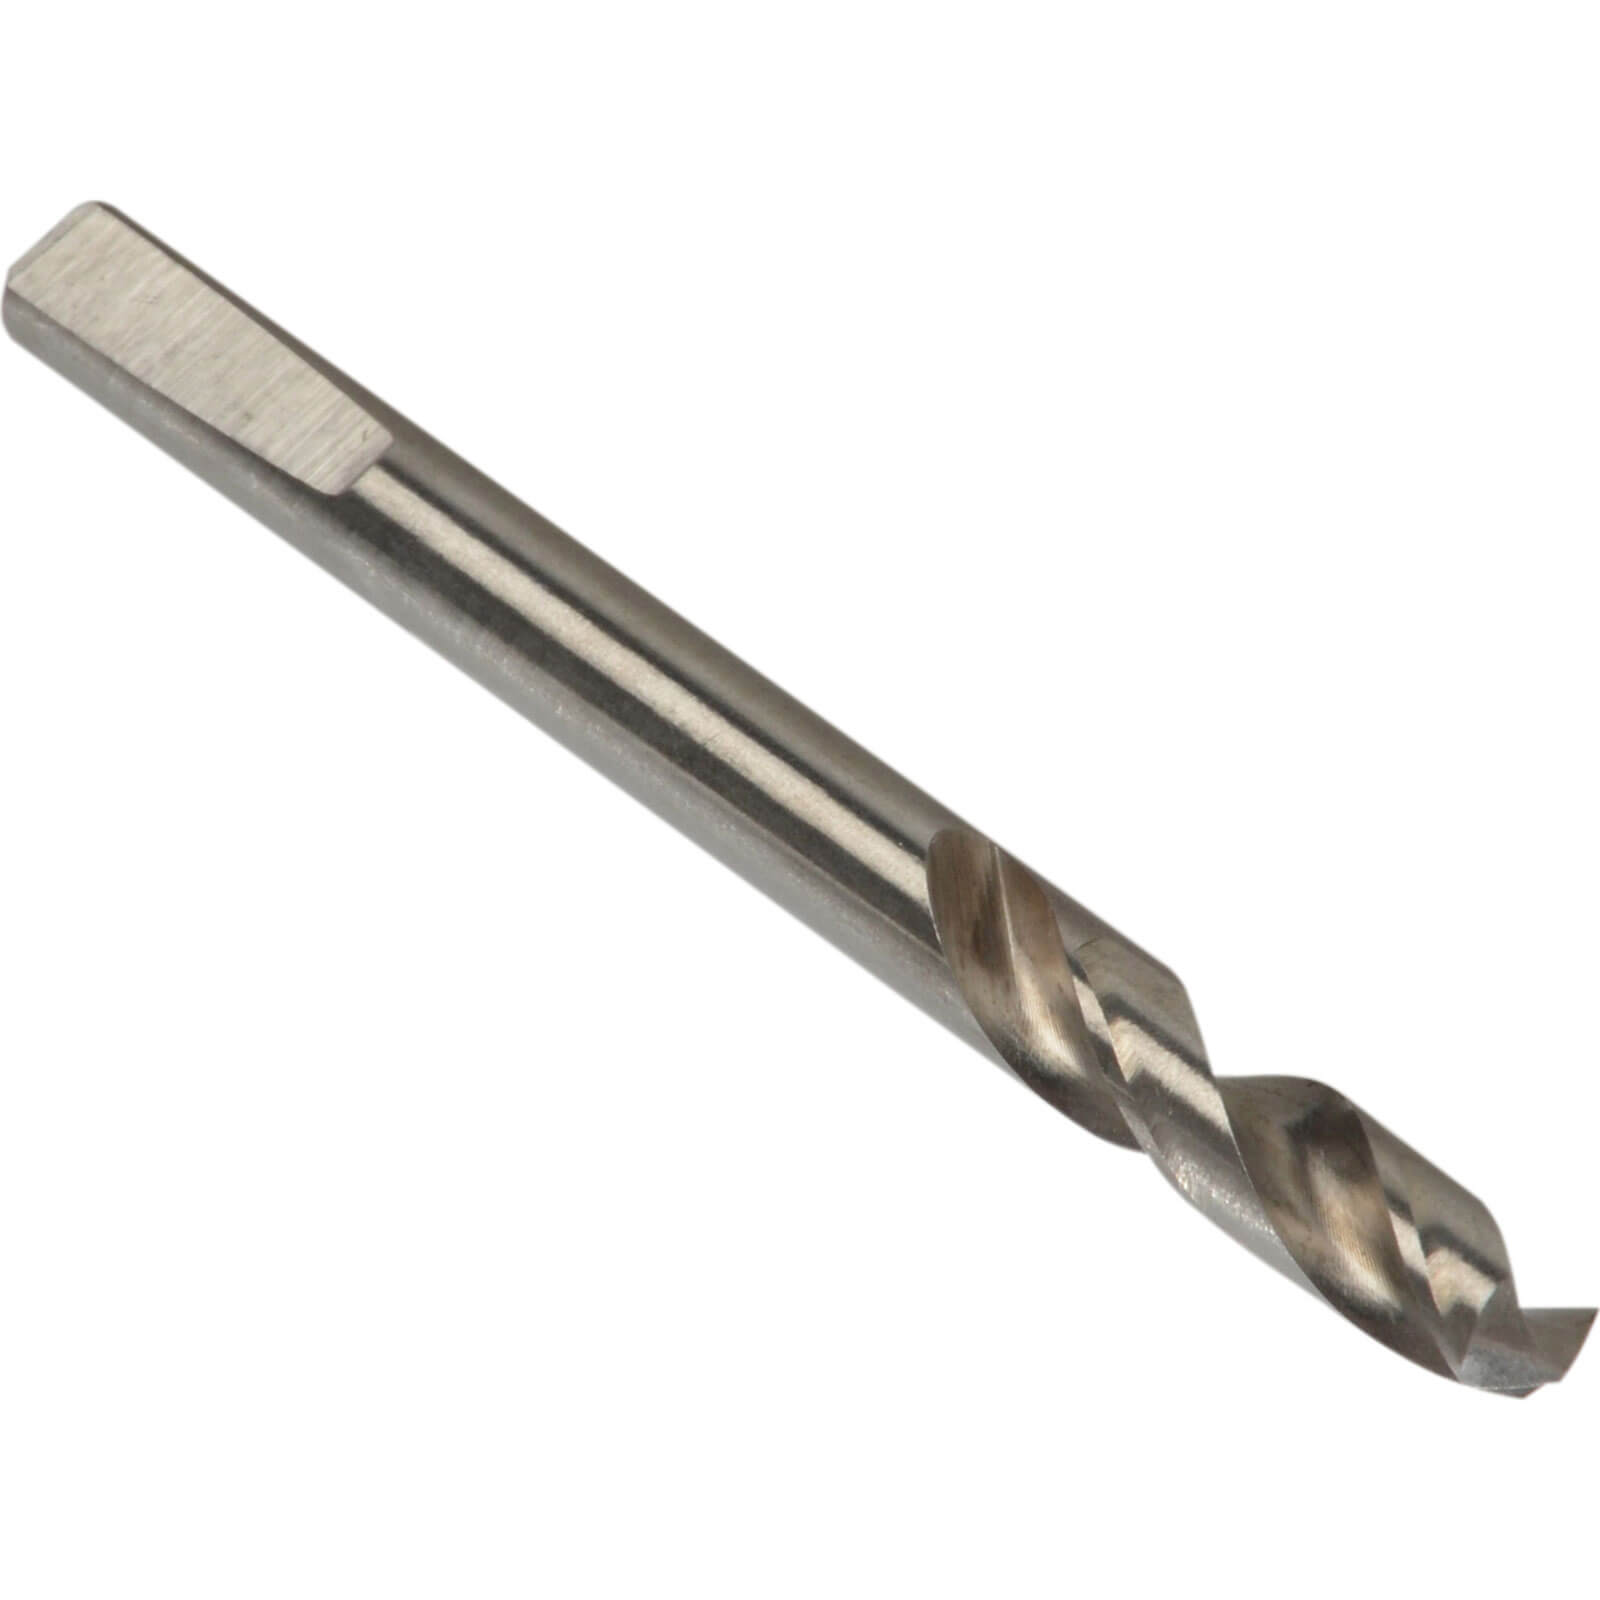 Photo of Bahco Replacement Hss Pilot Drill Bit For Hole Saw Arbors